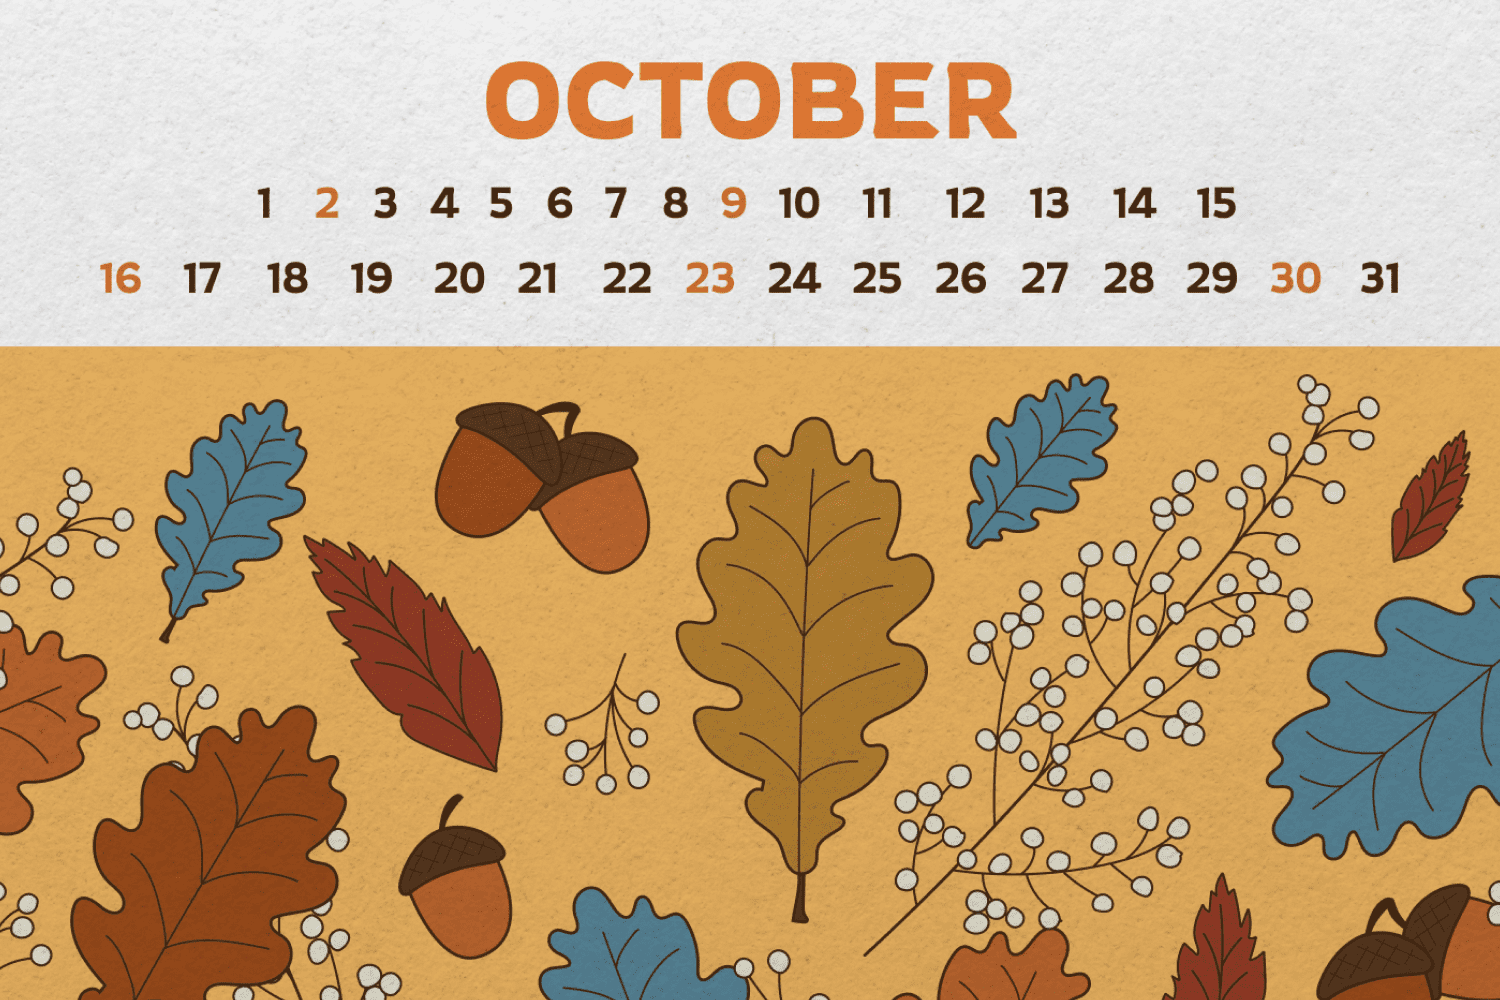 October calendar with drawn leaves, acorns, twigs.